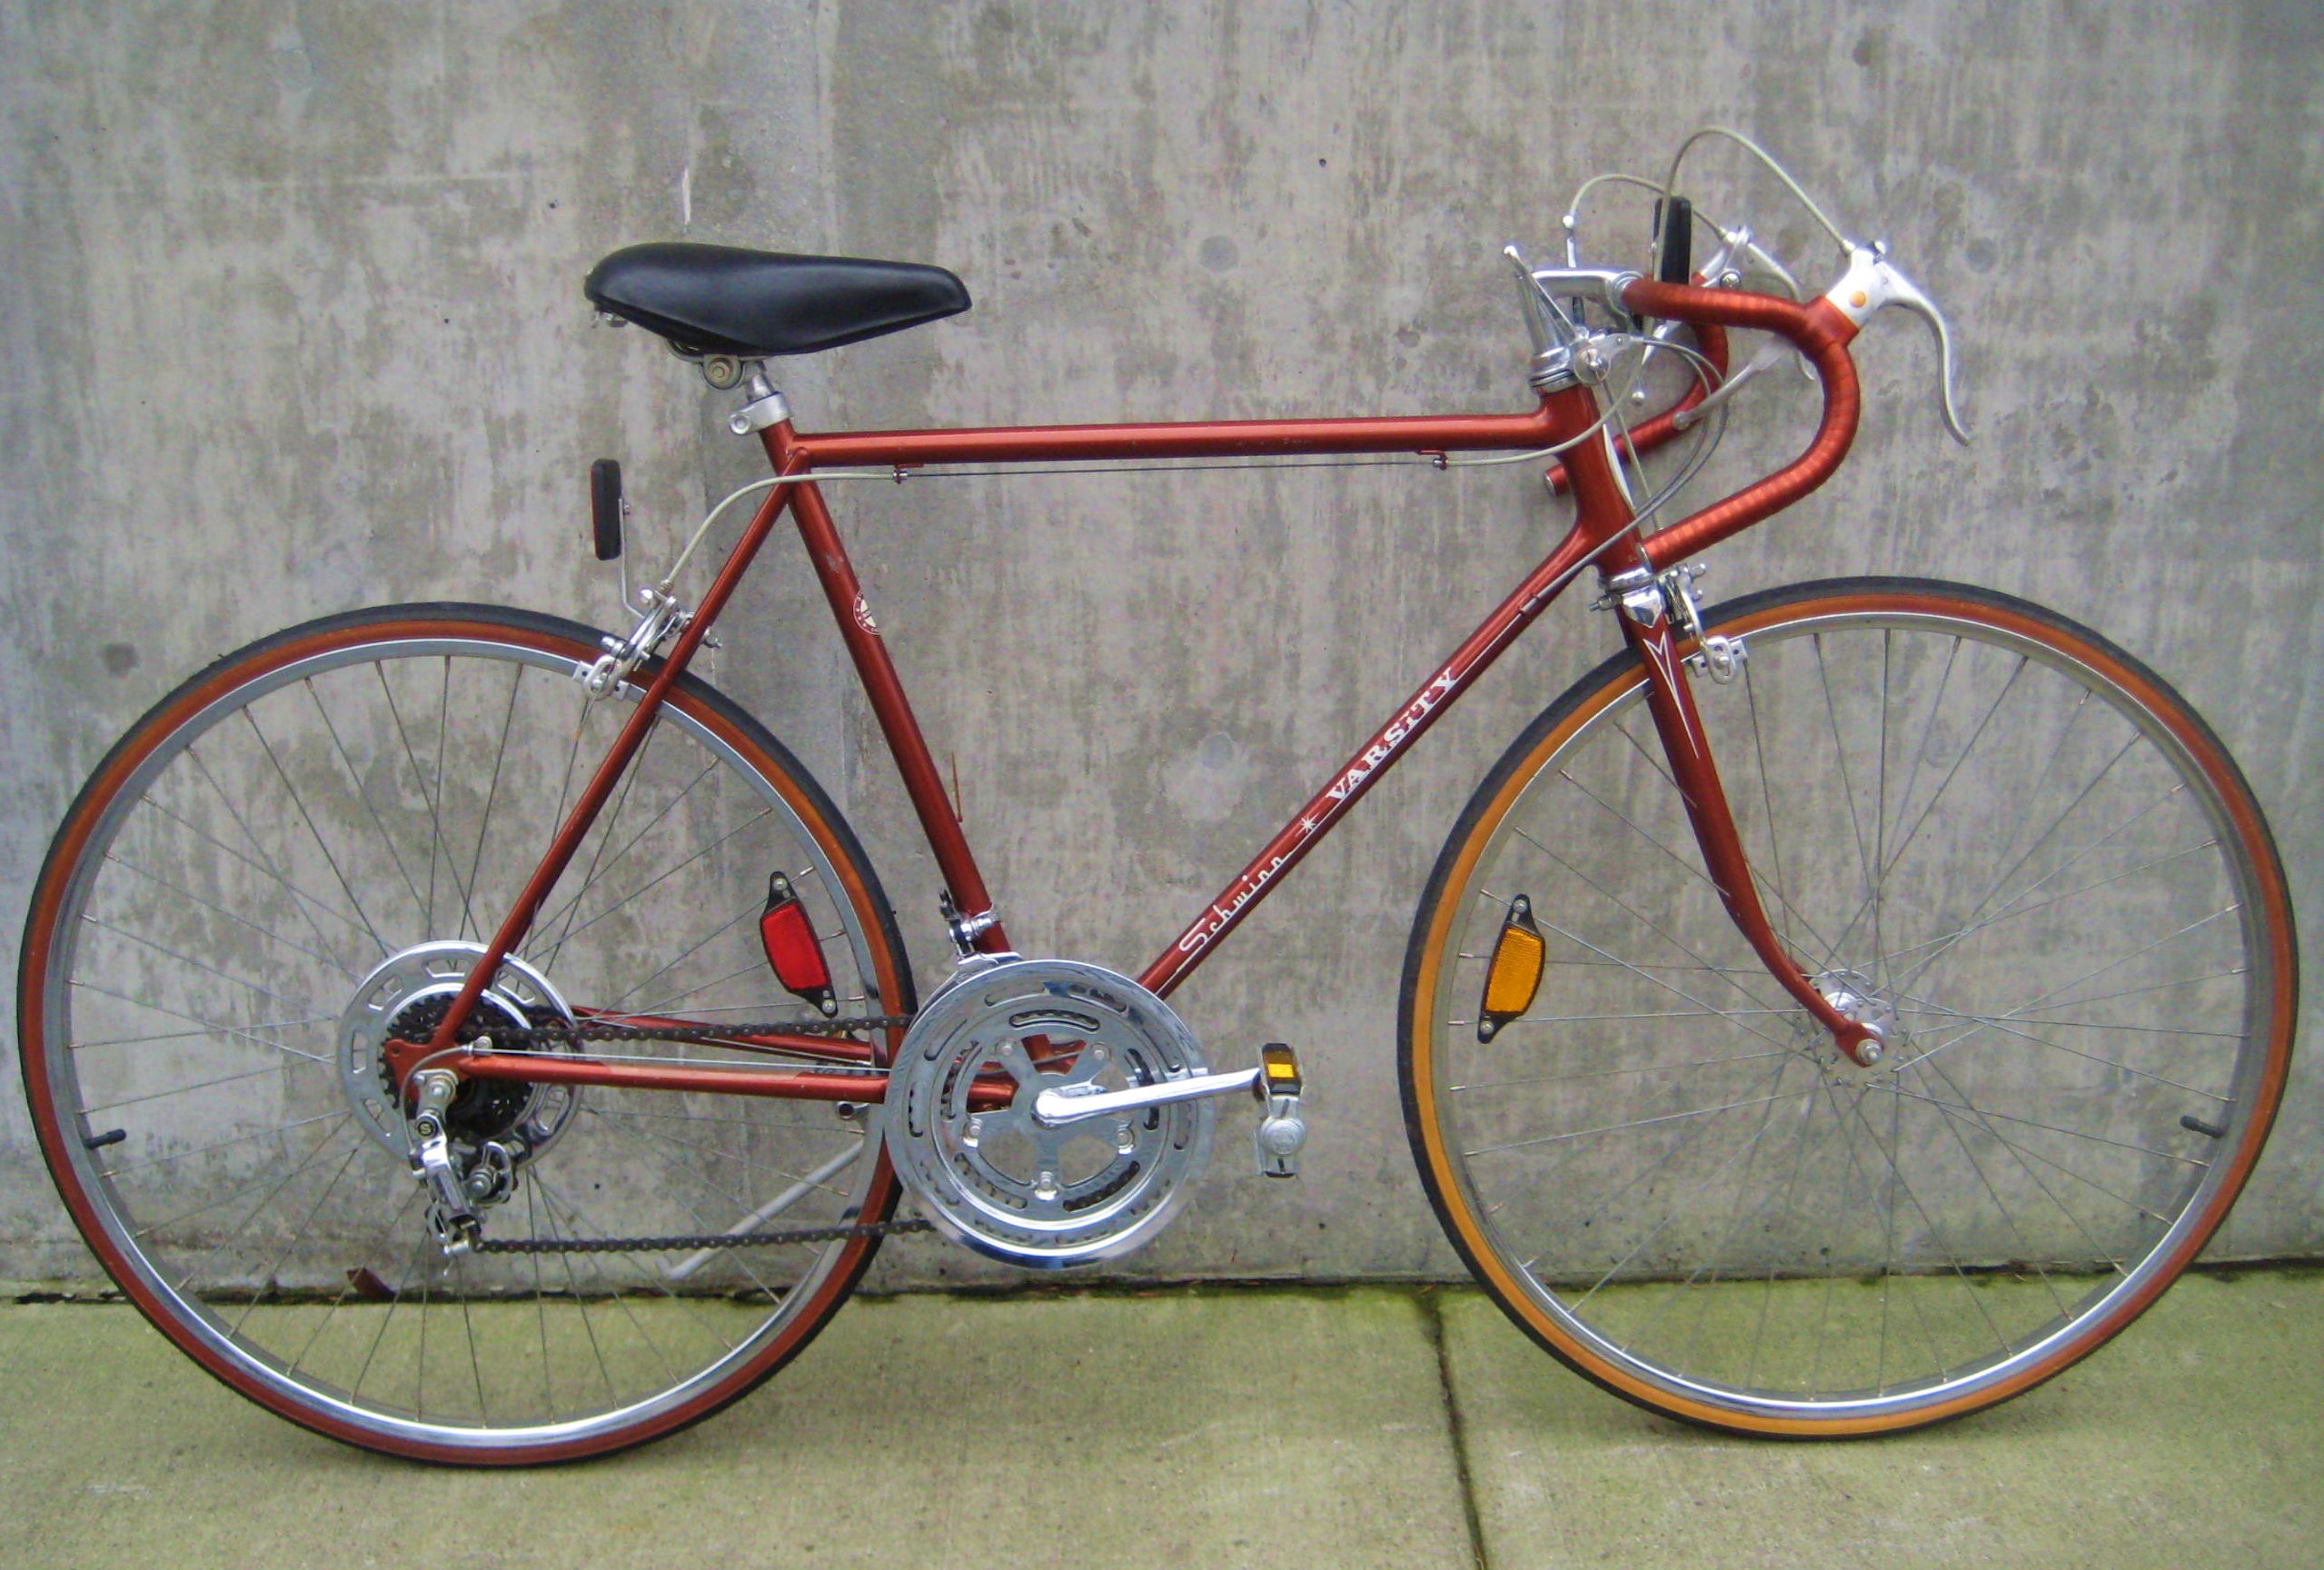 1975 Schwinn Varsity Sport bicycle at Classic Cycle Classic Cycle